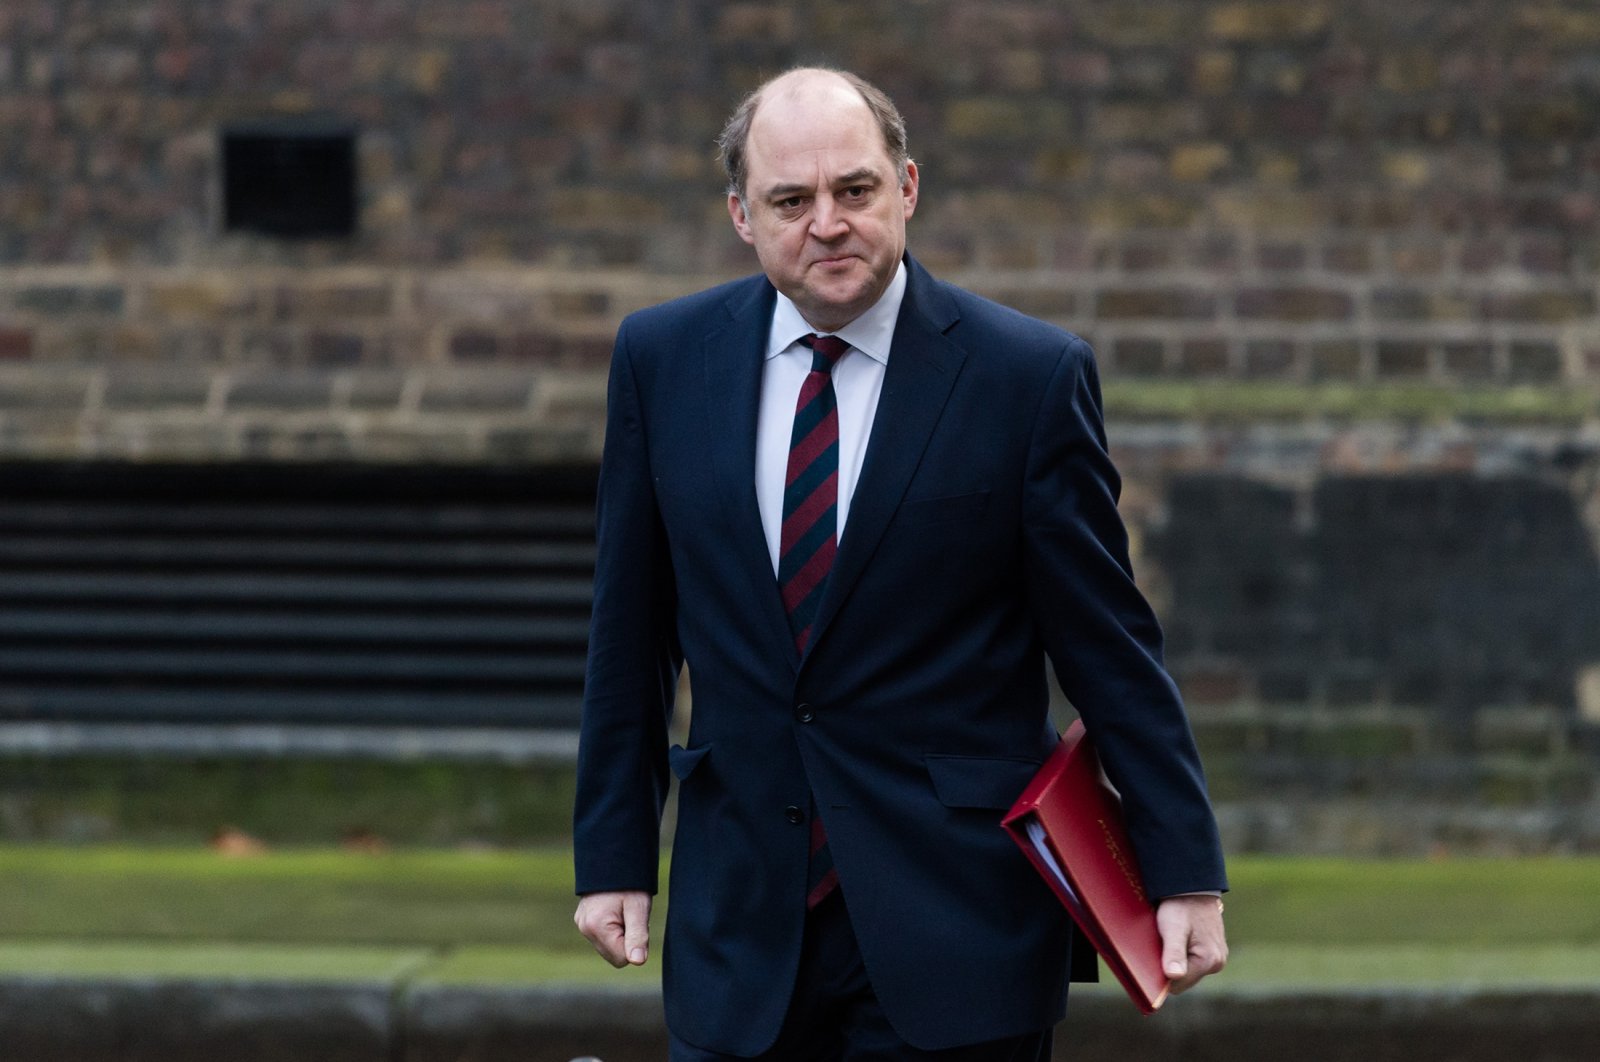 British Secretary of State for Defence Ben Wallace arrives in Downing Street in central London to attend a Cabinet meeting in London, England, Jan. 7, 2020. (Getty Images)